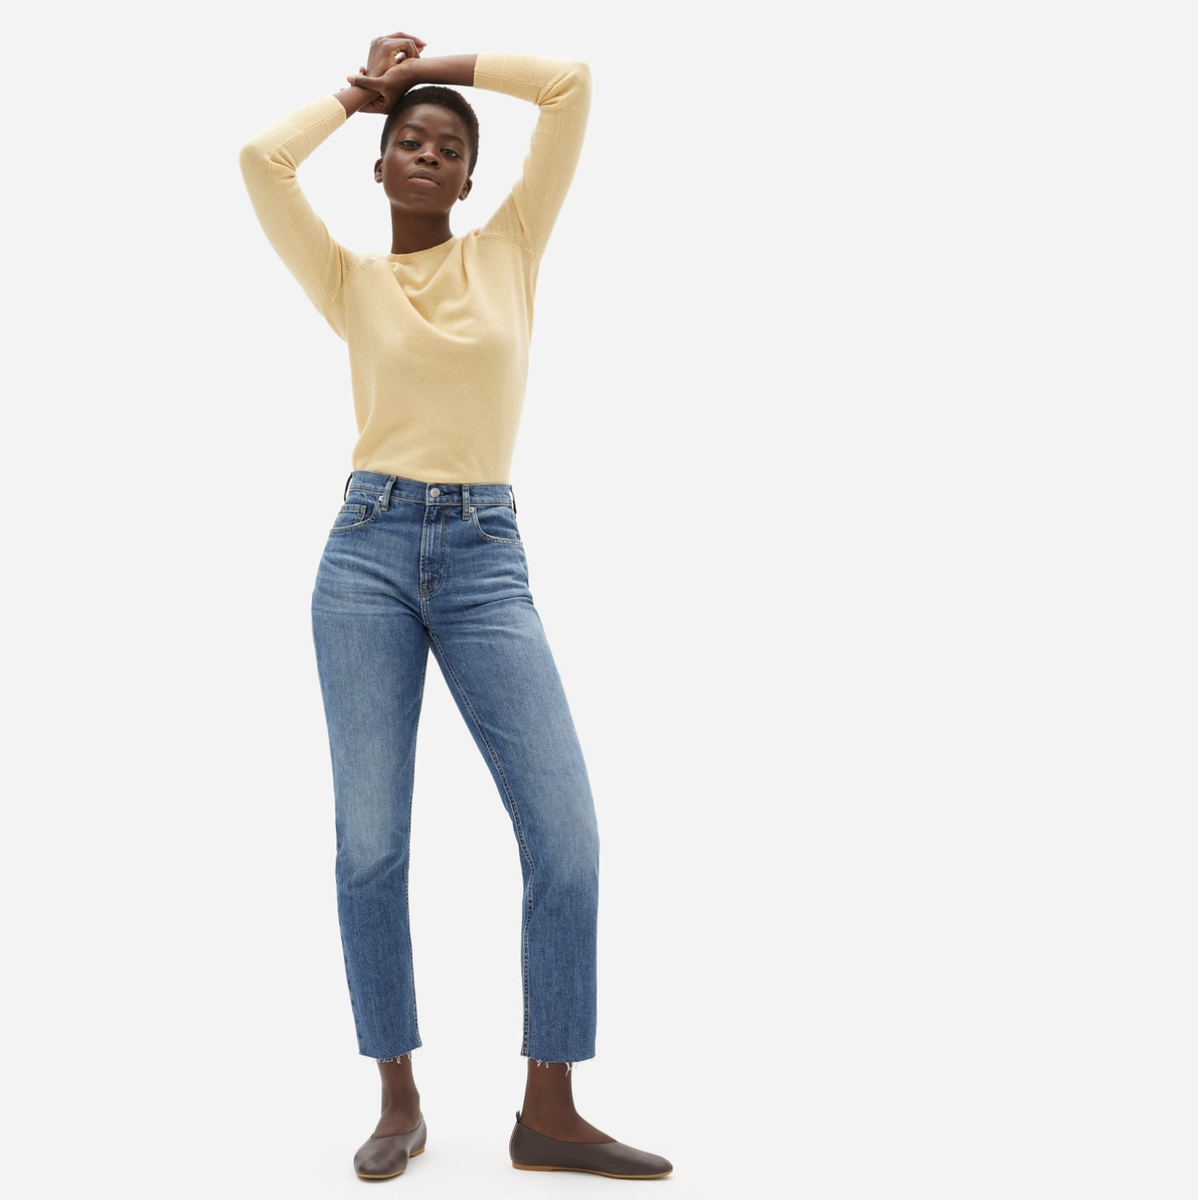 Once upon a time revealing your profit margin was seen as corporate suicide. But these days some retailers actually publish the full costs of making, for instance, a pair of jeans.  @Everlane produces breakdowns like this:  https://www.everlane.com/products/womens-high-rise-straight-jean-regular-classic-blue?collection=womens-newest-arrivals